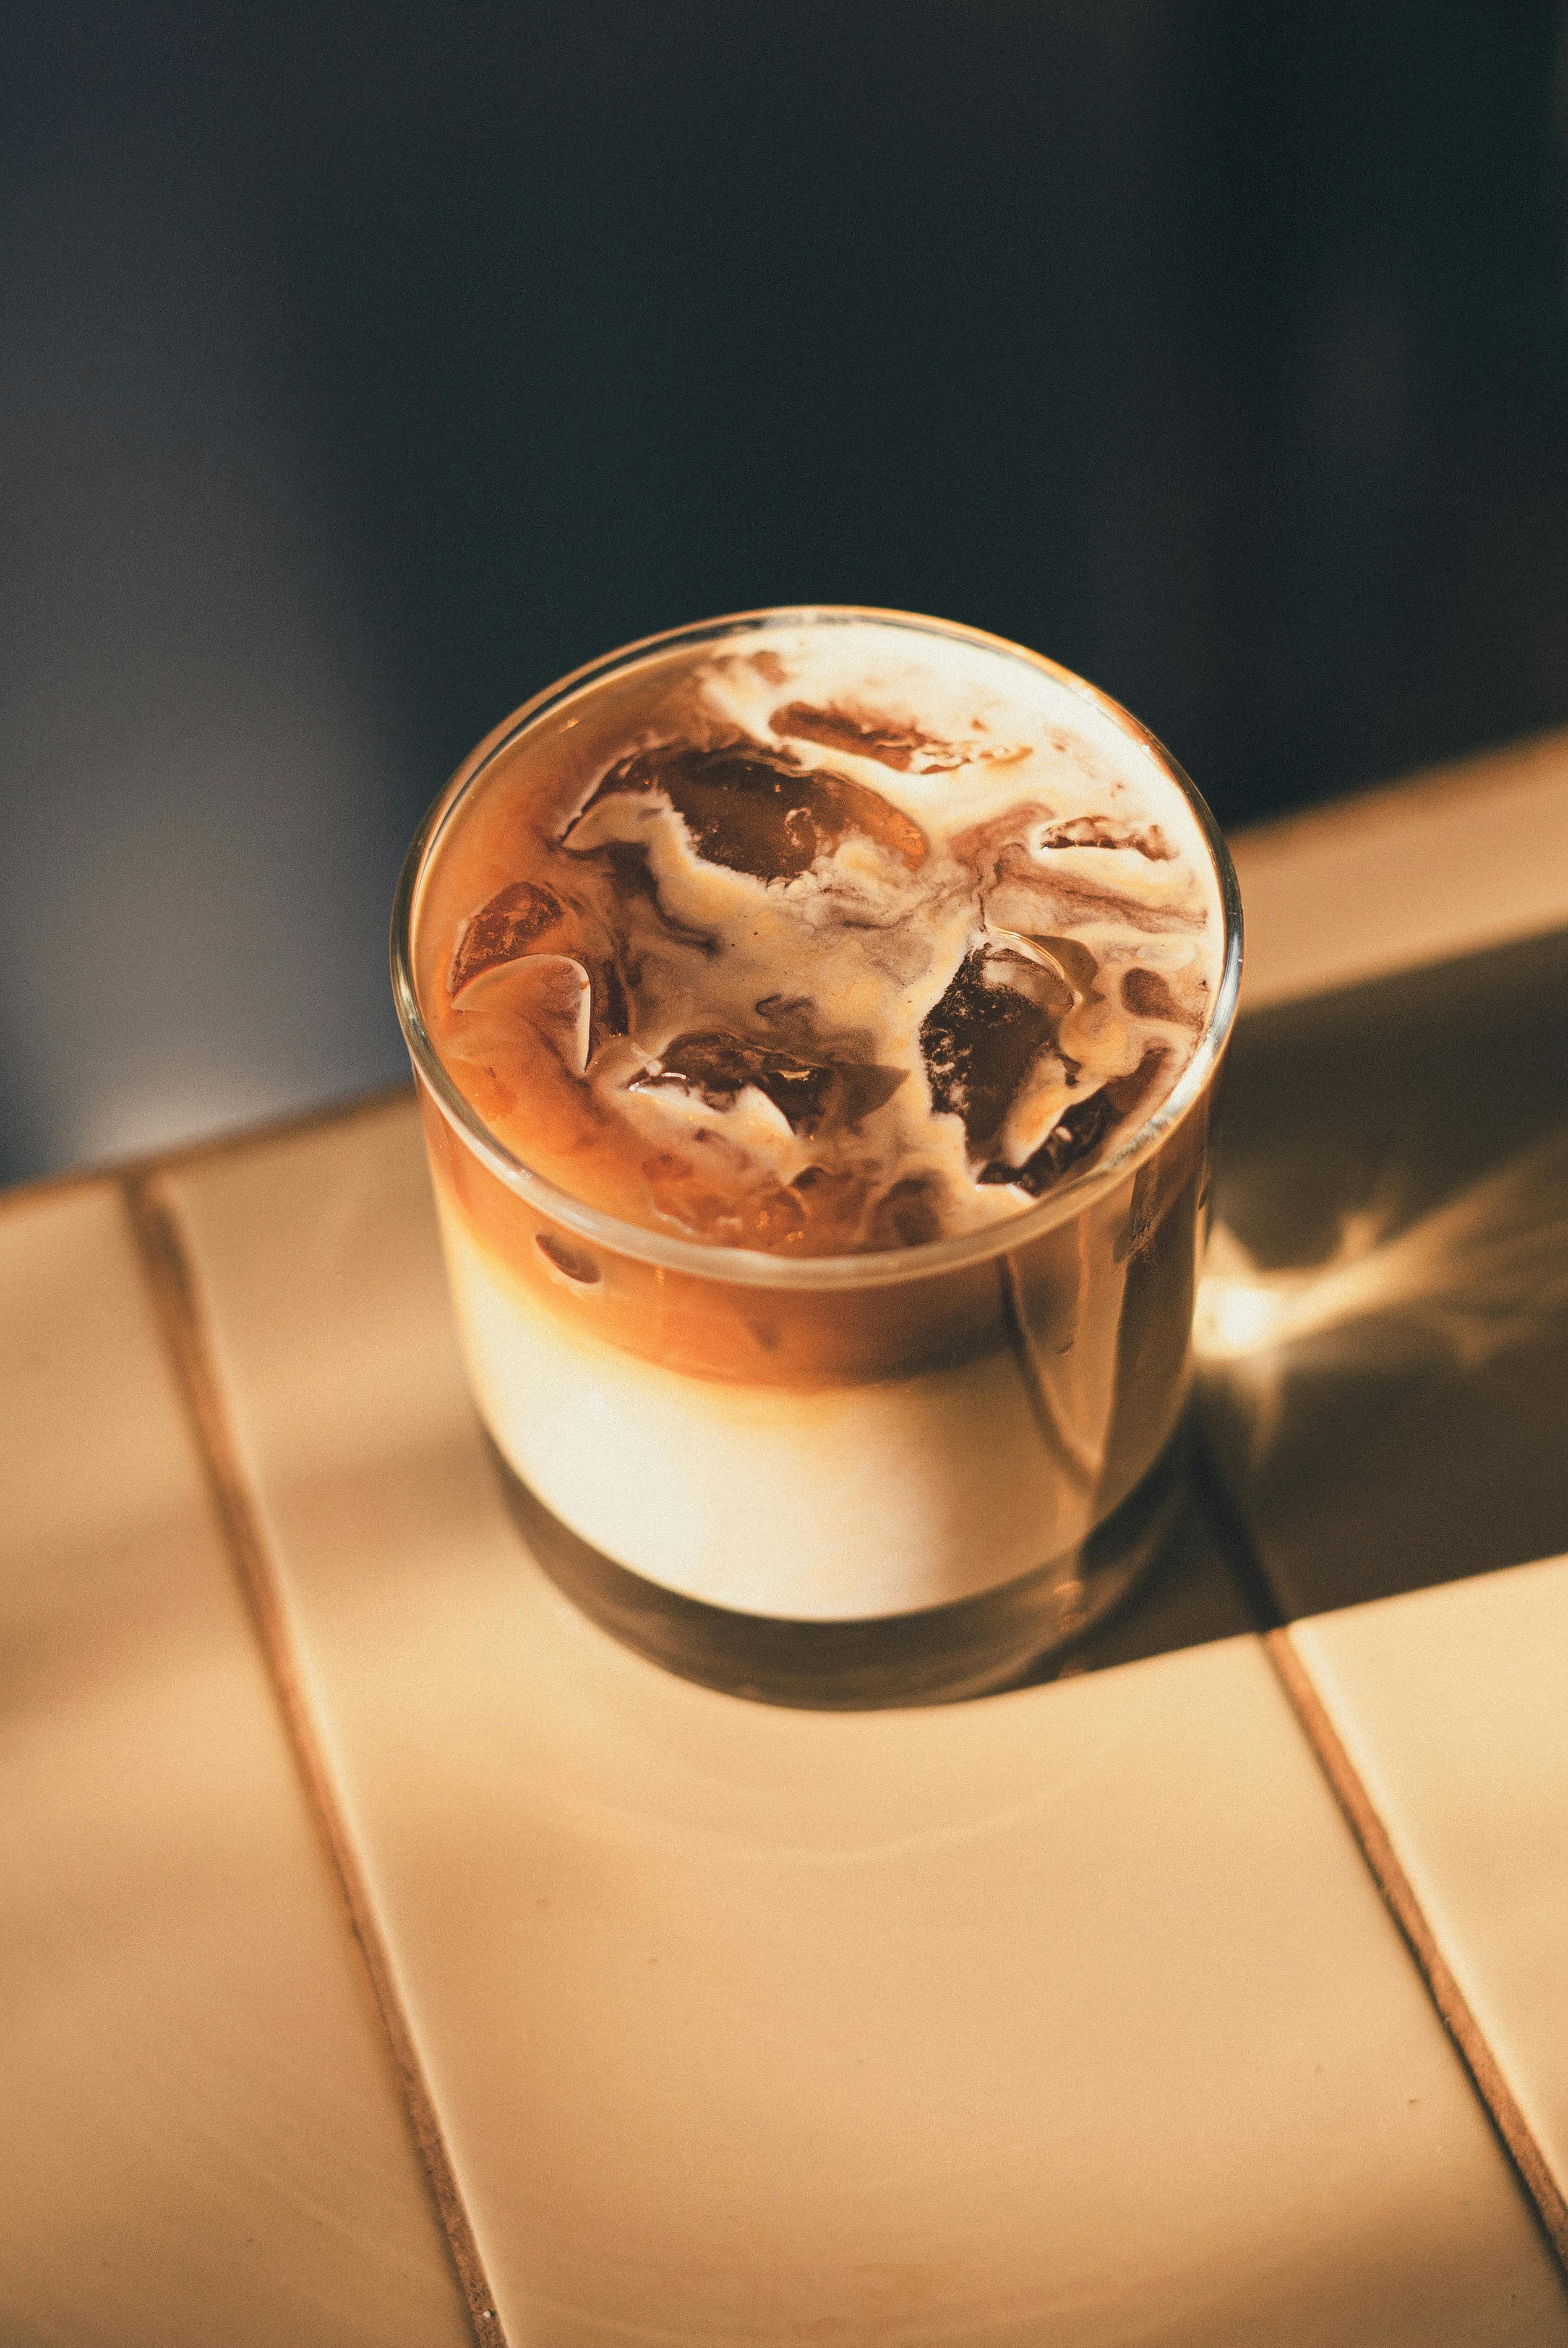 Iced coffee cocktail stock photo. Image of dessert, cold - 119566672